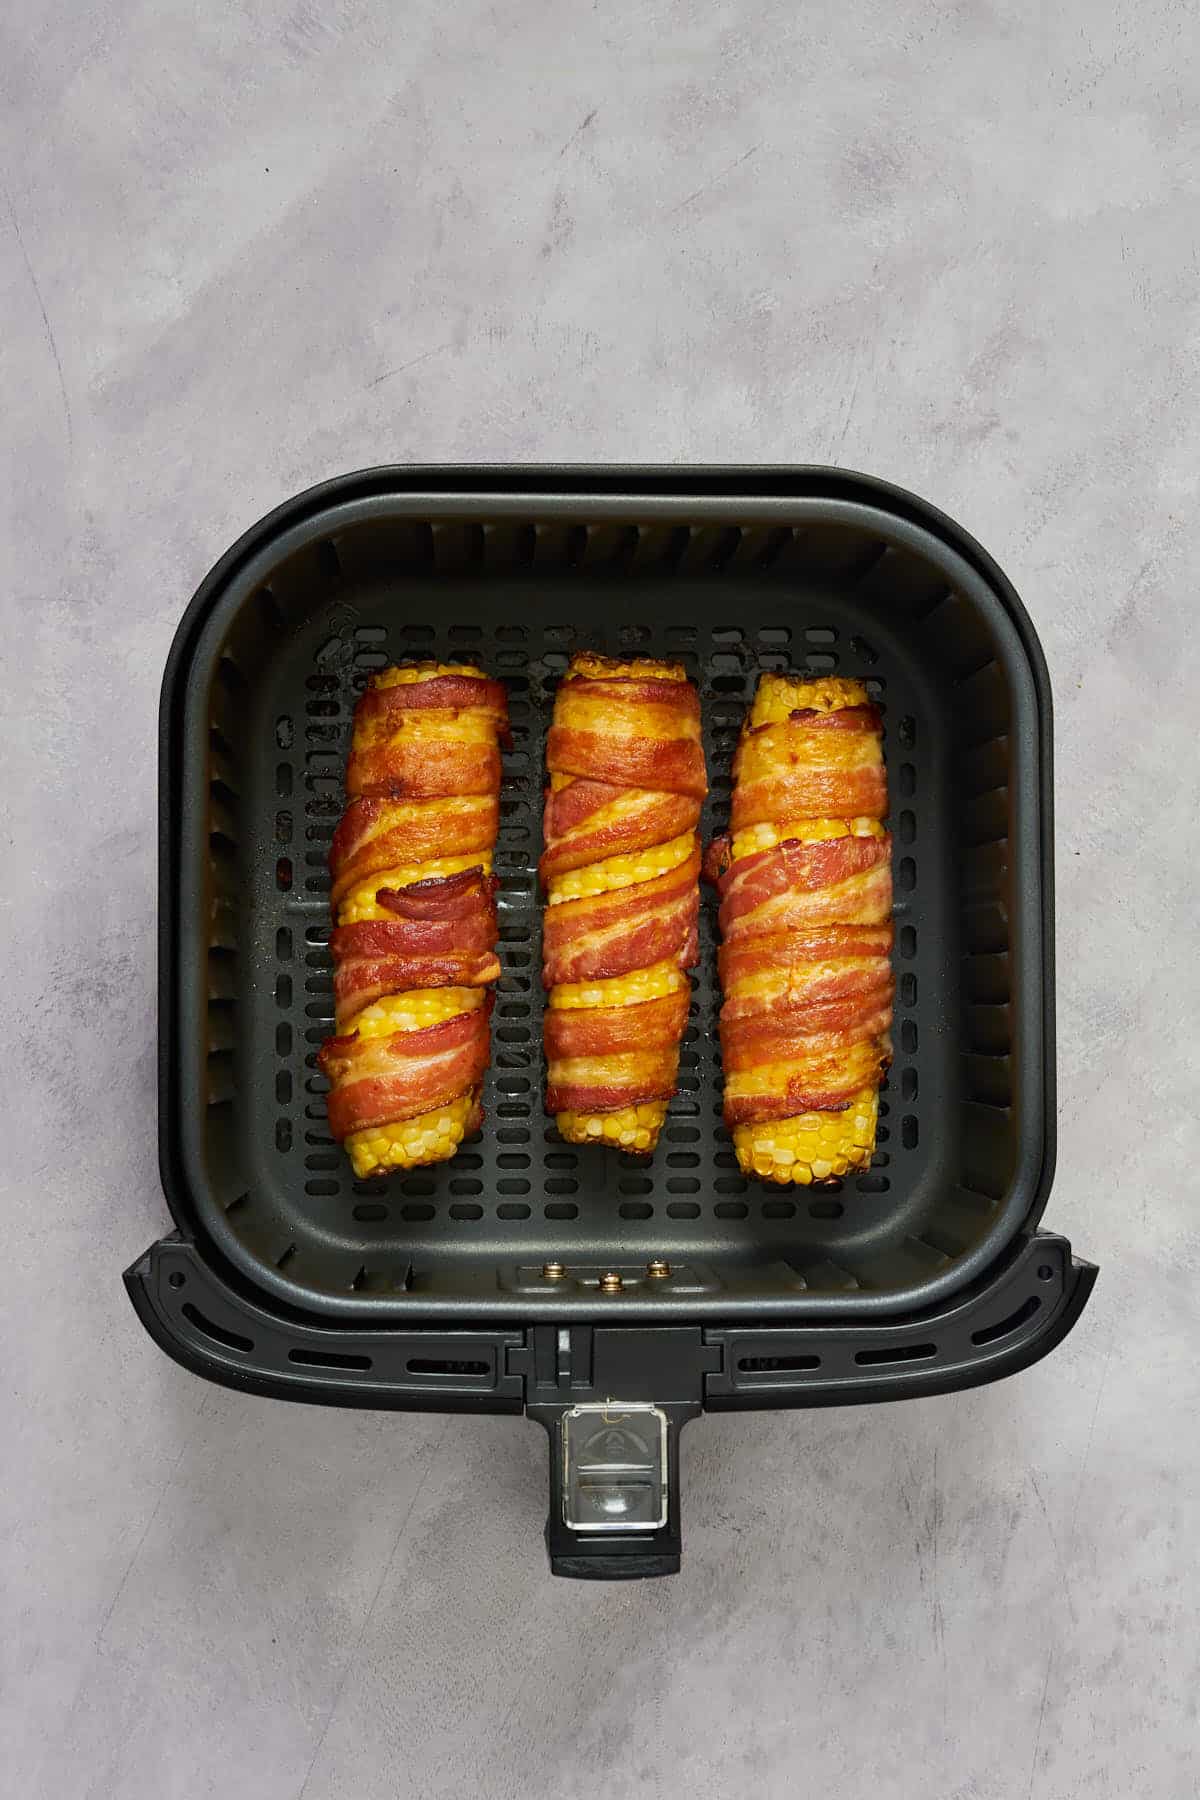 Inside the air fryer basket, corn on the cob wrapped in bacon after air frying.